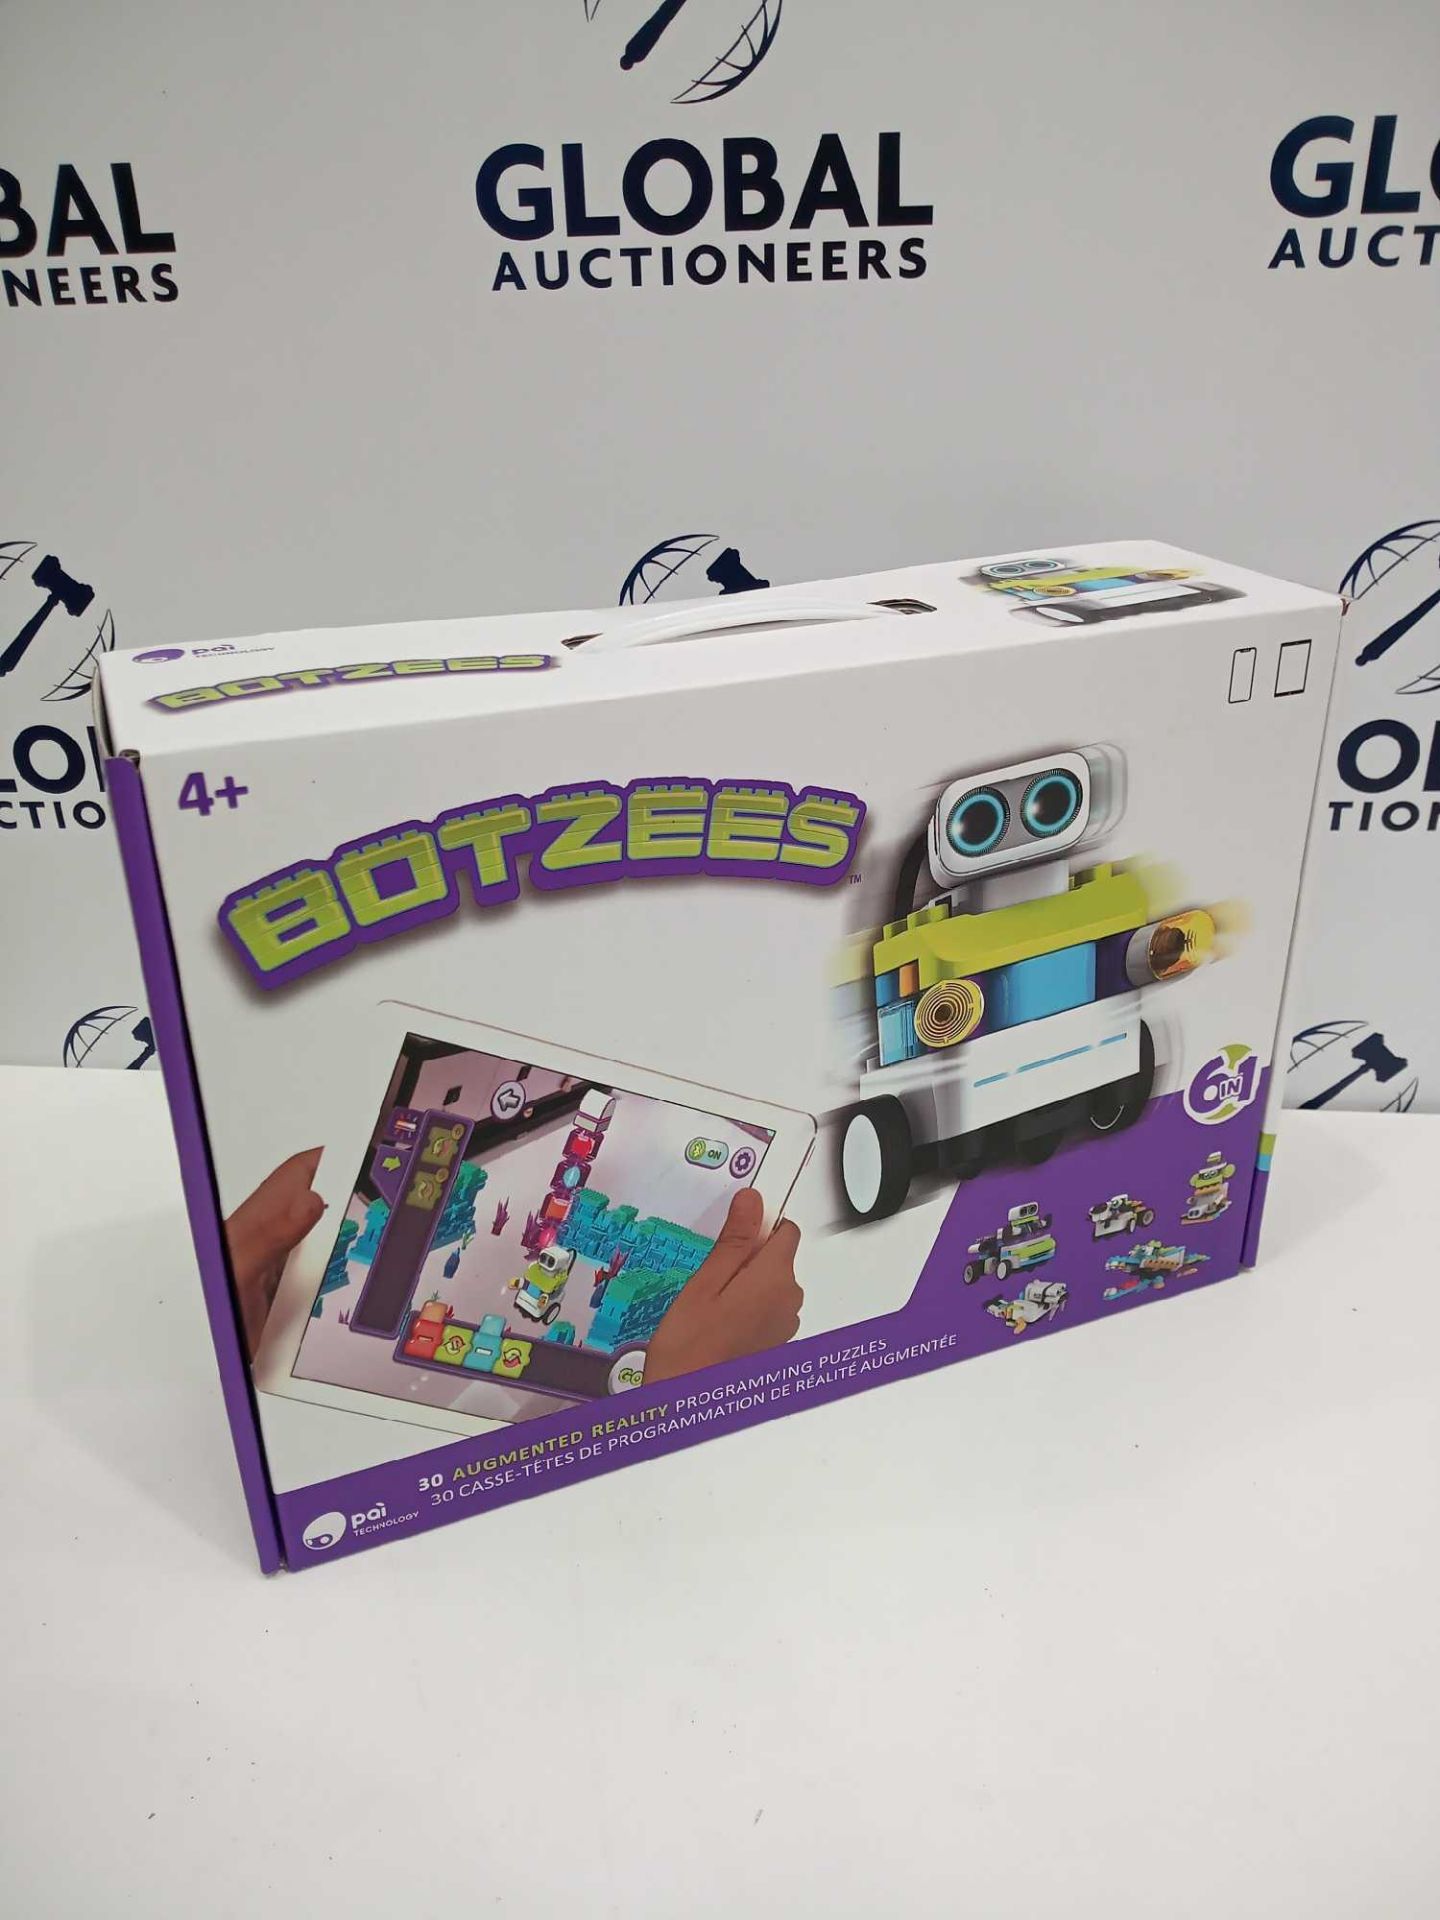 Rrp £120 Botzees Augmented Reality Programmable Robot With 30Th Programming Puzzles